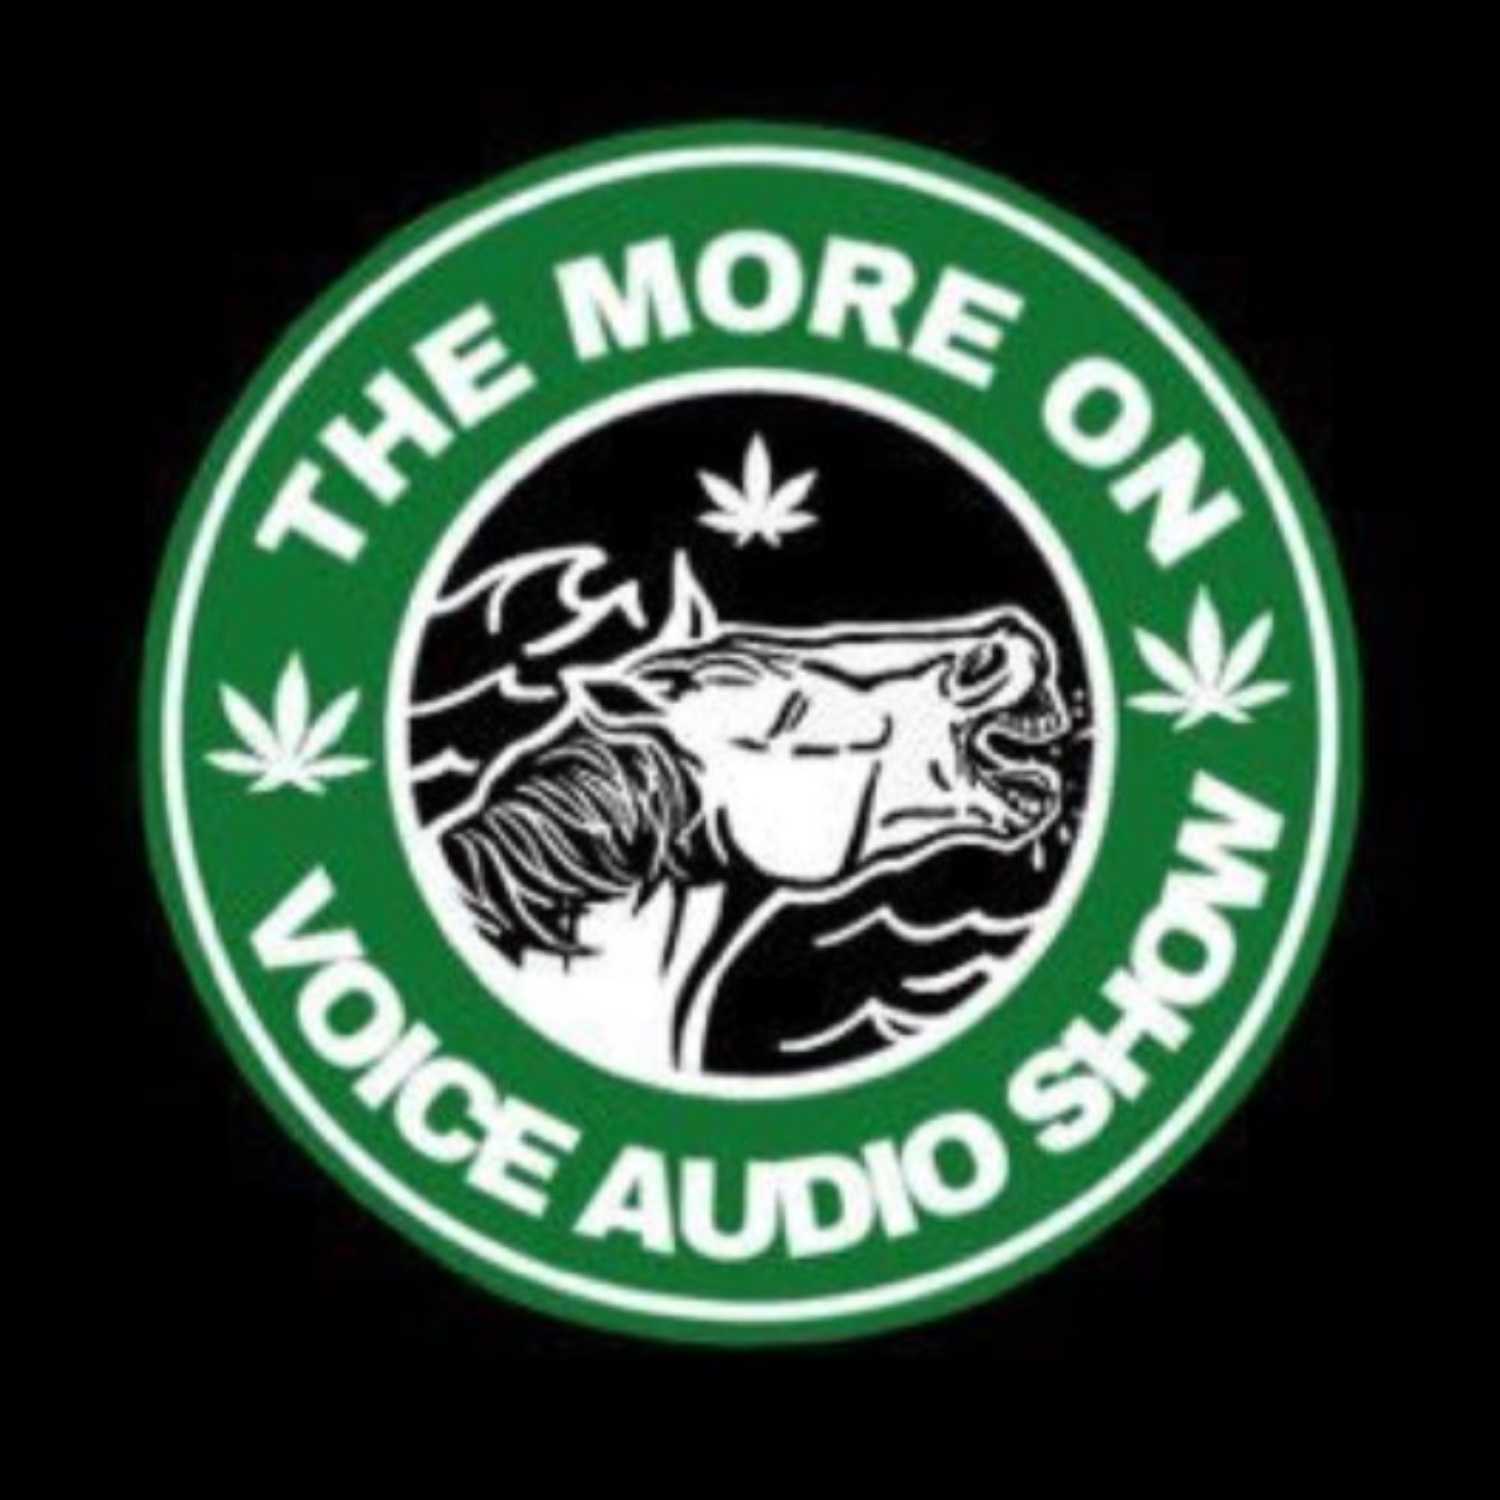 The More On Voice Audio Show: Episode 41 (Jon Hanks of Mongo Chatter)